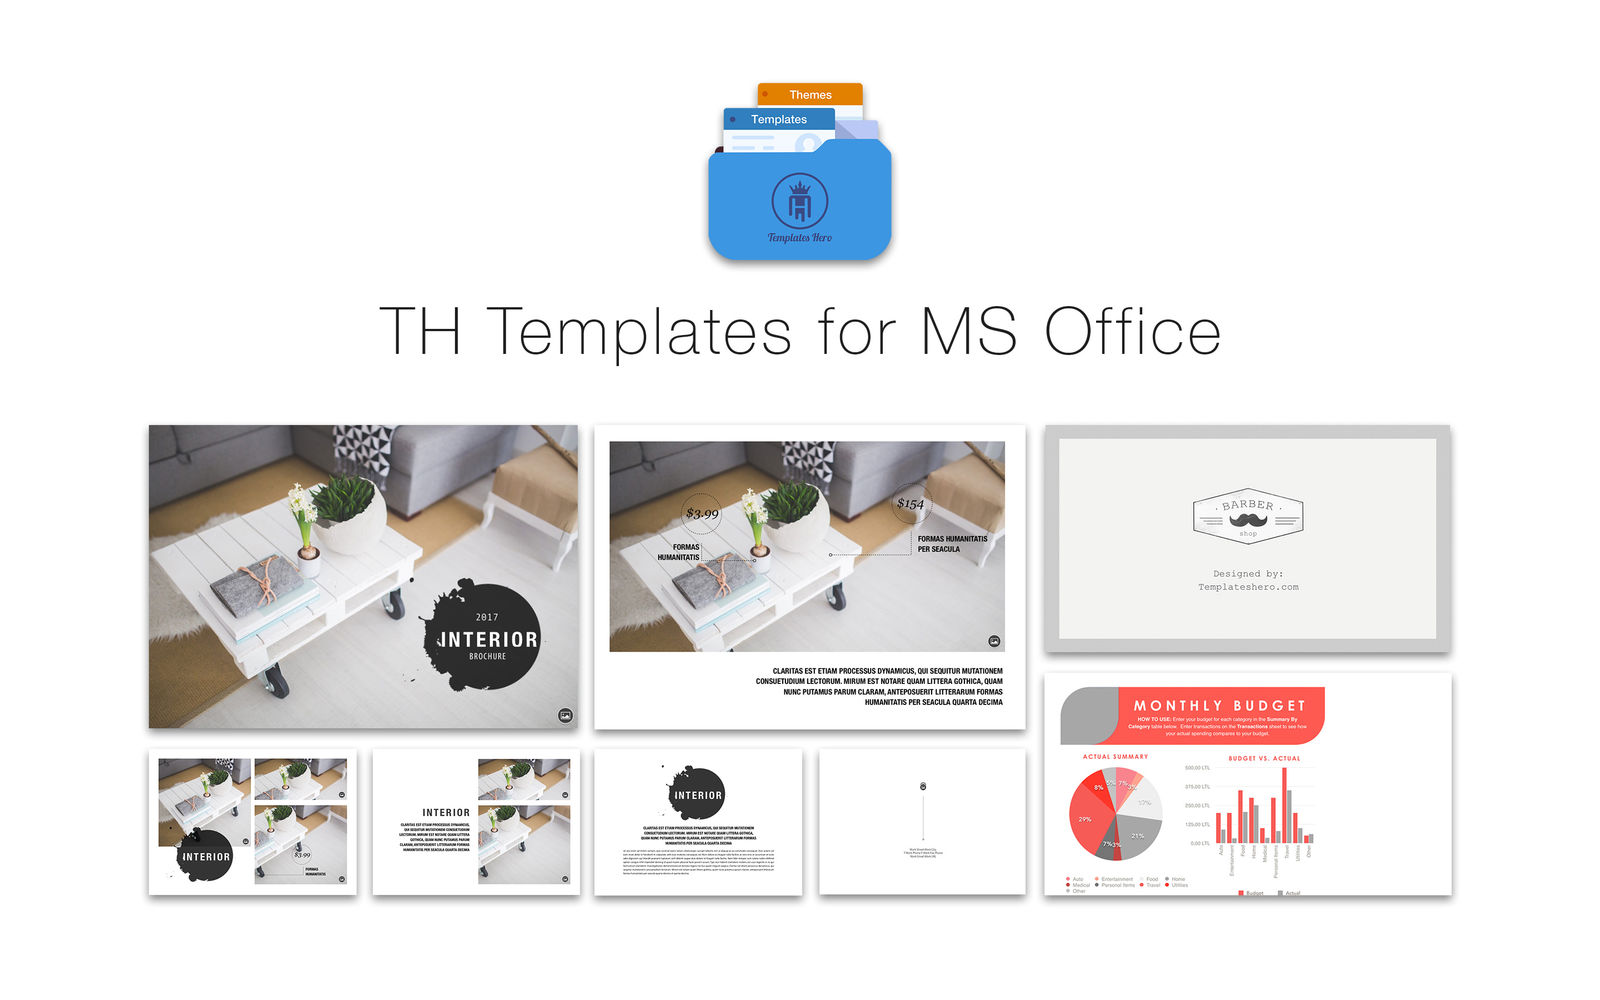 TH Templates for MS Office 2.0 : Main Window